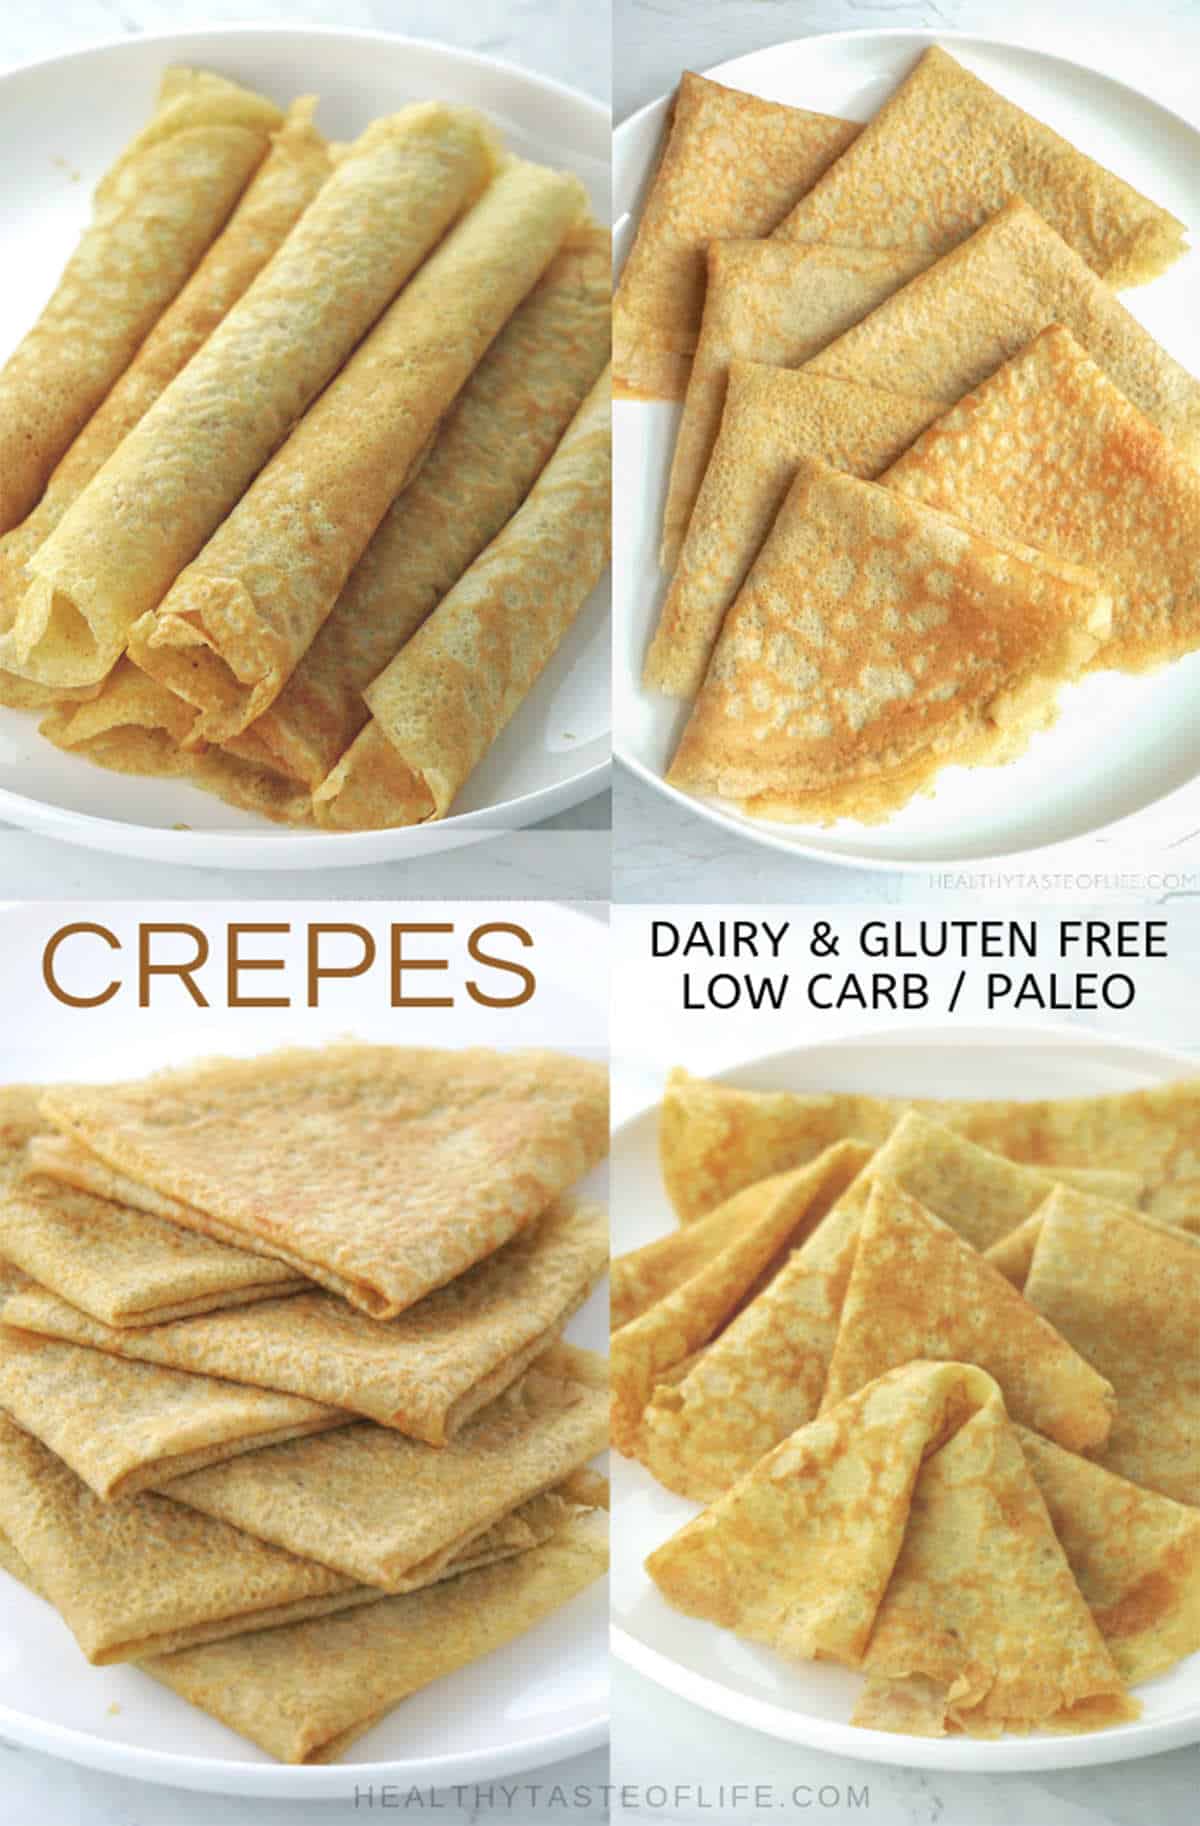 Easy low carb gluten free almond flour crepes that are also dairy free, grain free, keto and paleo compliant. These low carb gluten free crepes come with 3 different sweet & savory filling ideas, perfect for a healthy clean eating breakfast, lunch, dinner, or dessert. #lowcarbcrepes #savory #glutenfreecrepes #grainfreecrepes #dairyfreecrepes #almondflourcrepes  #paleocrepes